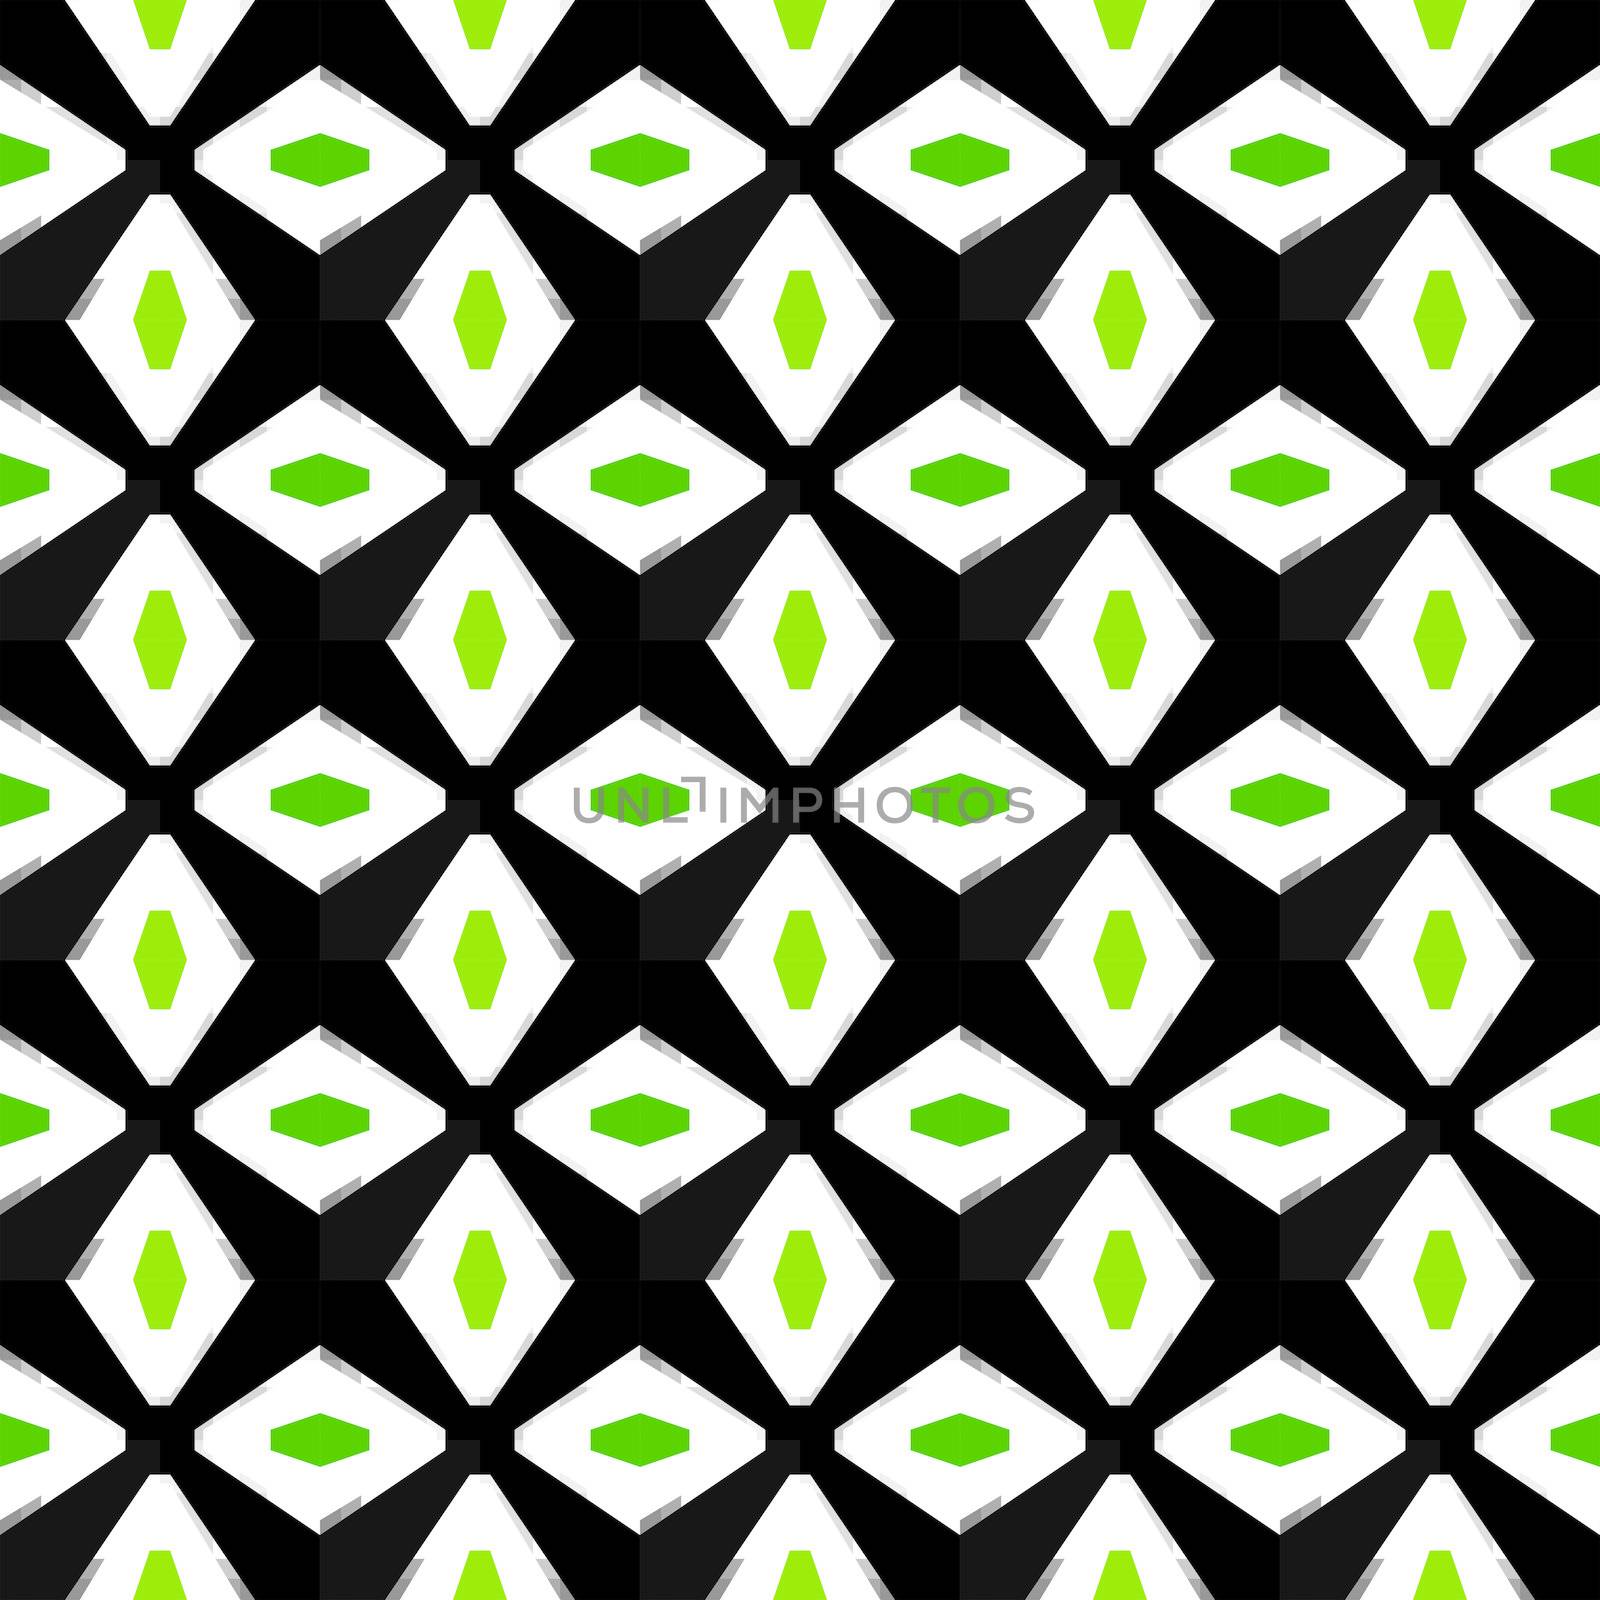 Abstract Diamond Pattern by graficallyminded